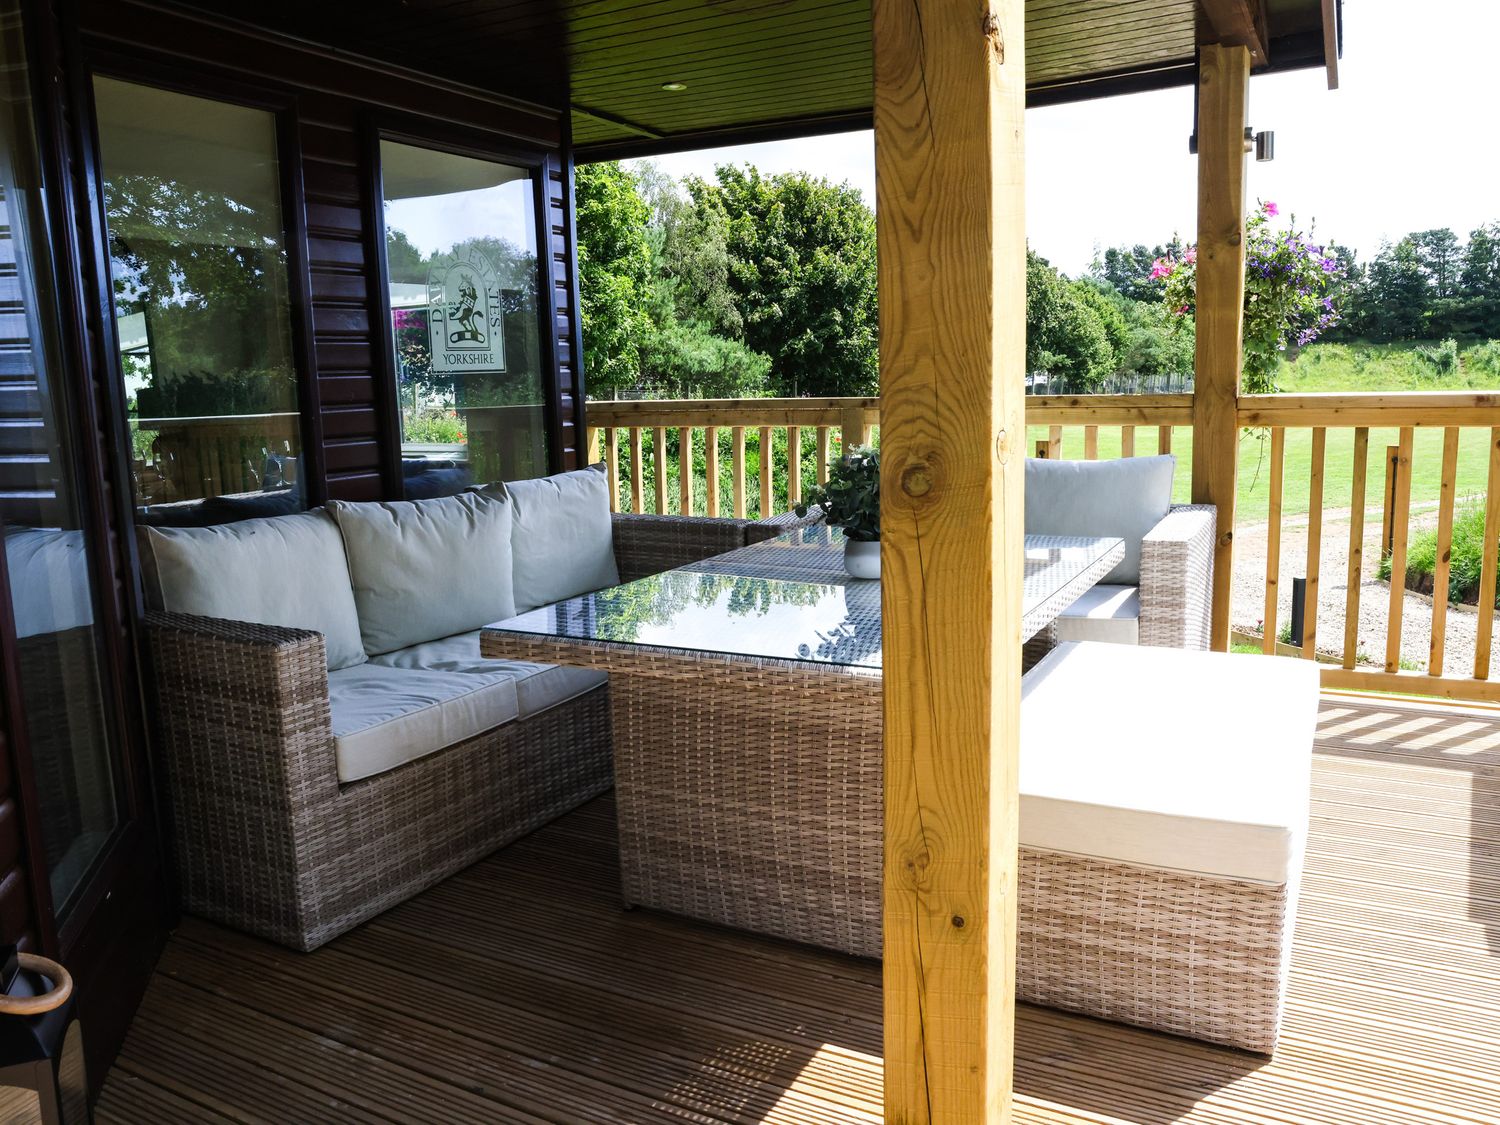 Bedale View Lodge, Wykeham near East Ayton, North Yorkshire. Near a National Park. Off-road parking.